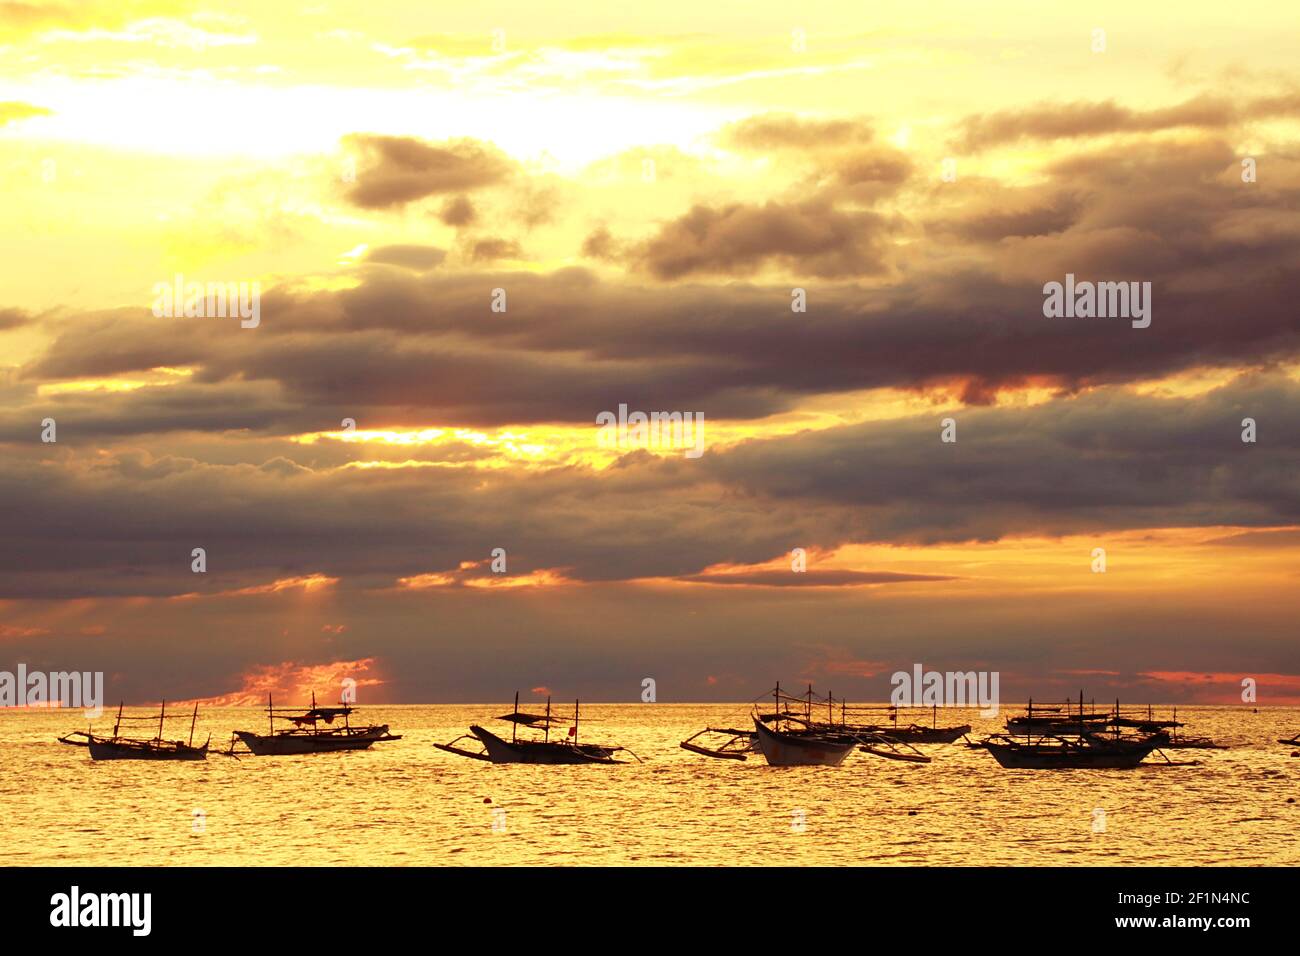 Floating Fishing Boat on A Cloudy Sunset Stock Photo